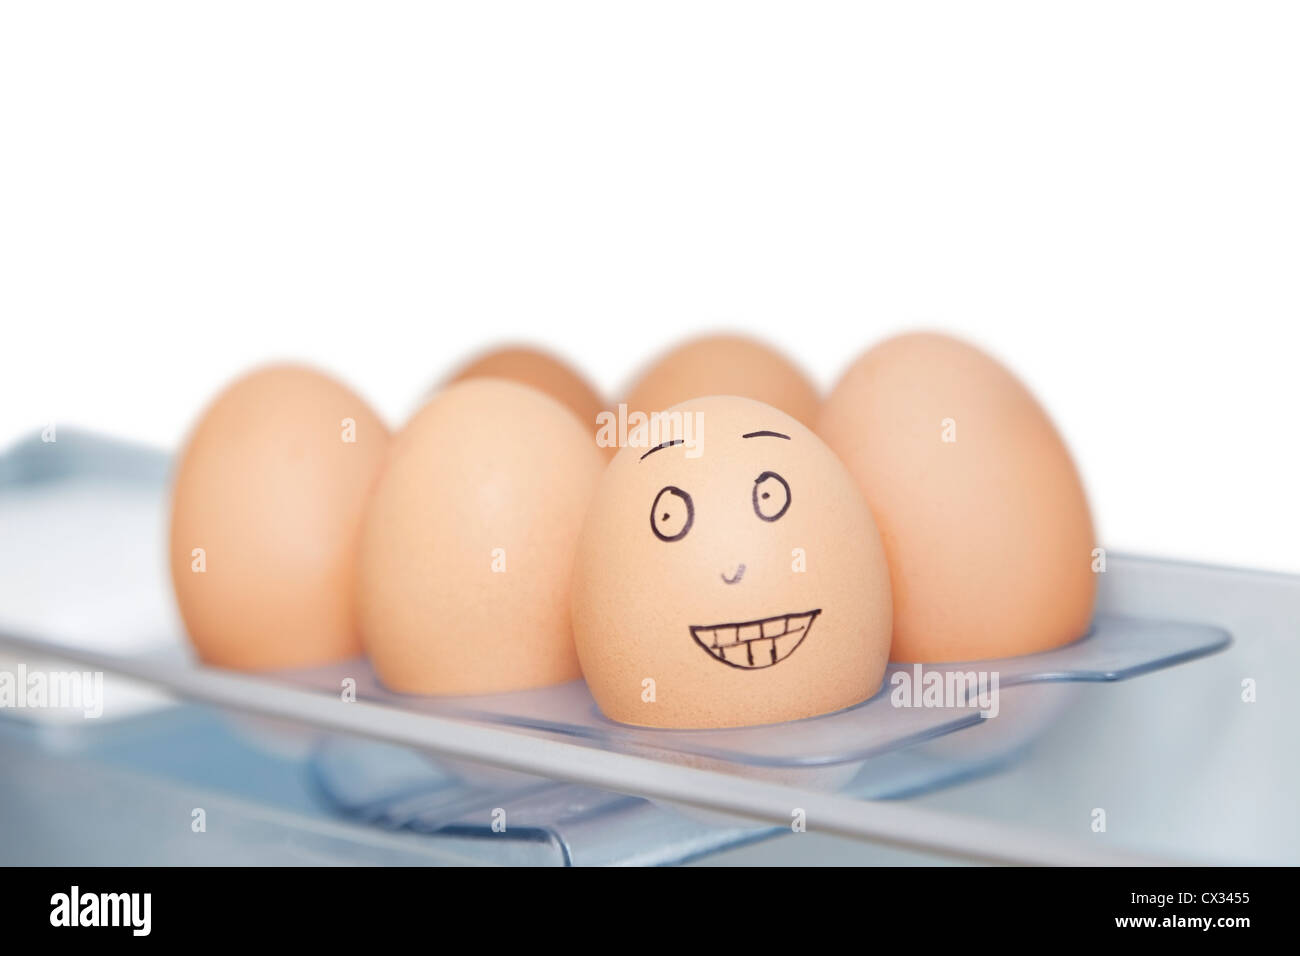 Anthropomorphic and plain brown eggs in carton against white background Stock Photo